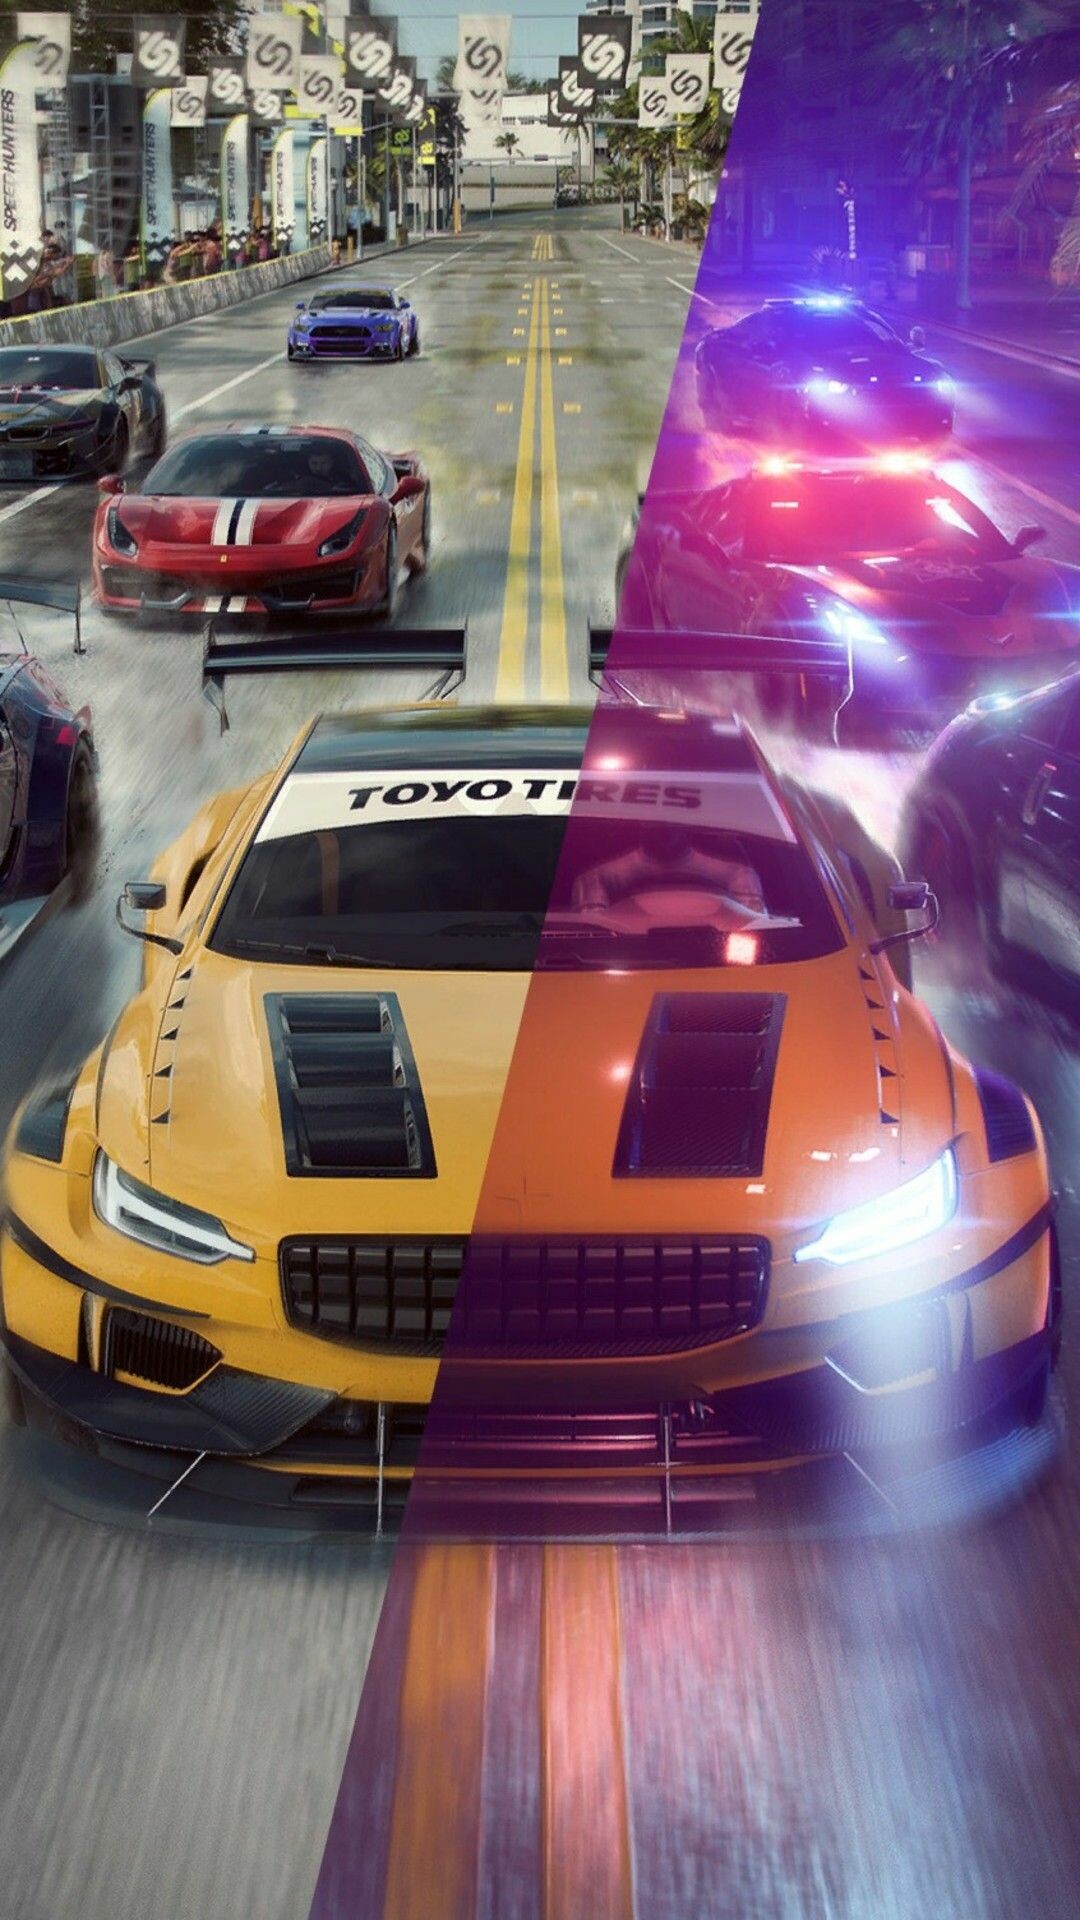 Need for Speed: NFS: Heat, A 2019 racing video game developed by Ghost Games. 1080x1920 Full HD Wallpaper.